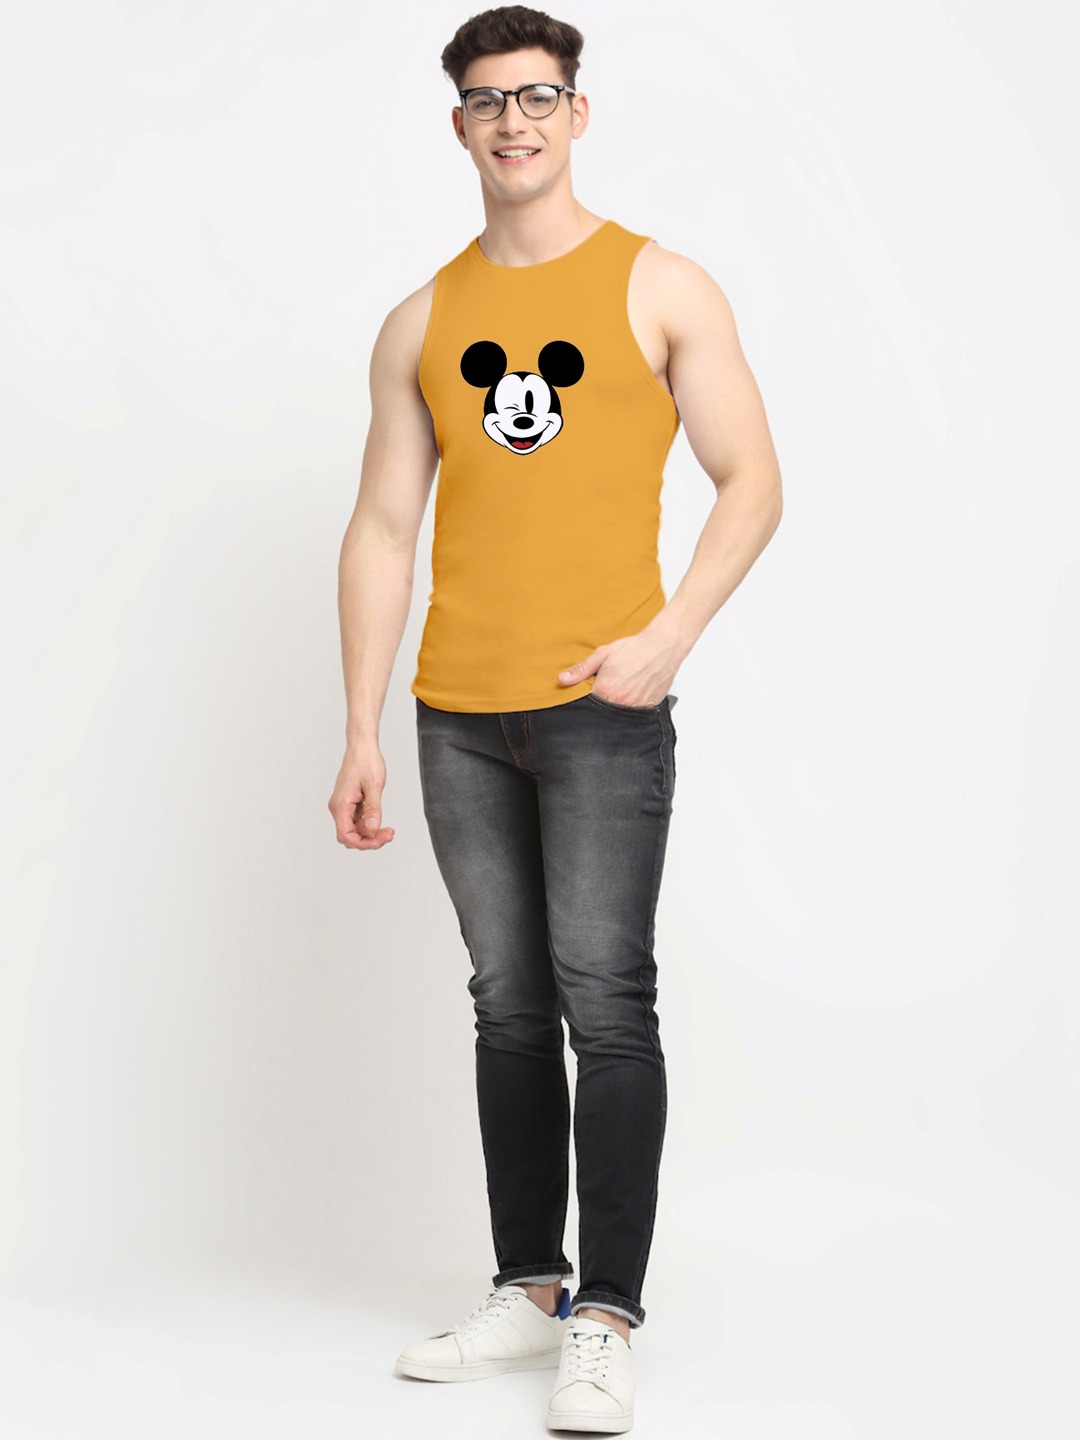 Clothing Innerwear Vests | Friskers Men Gold-Toned Printed Pure Cotton Innerwear Vests - XU53945